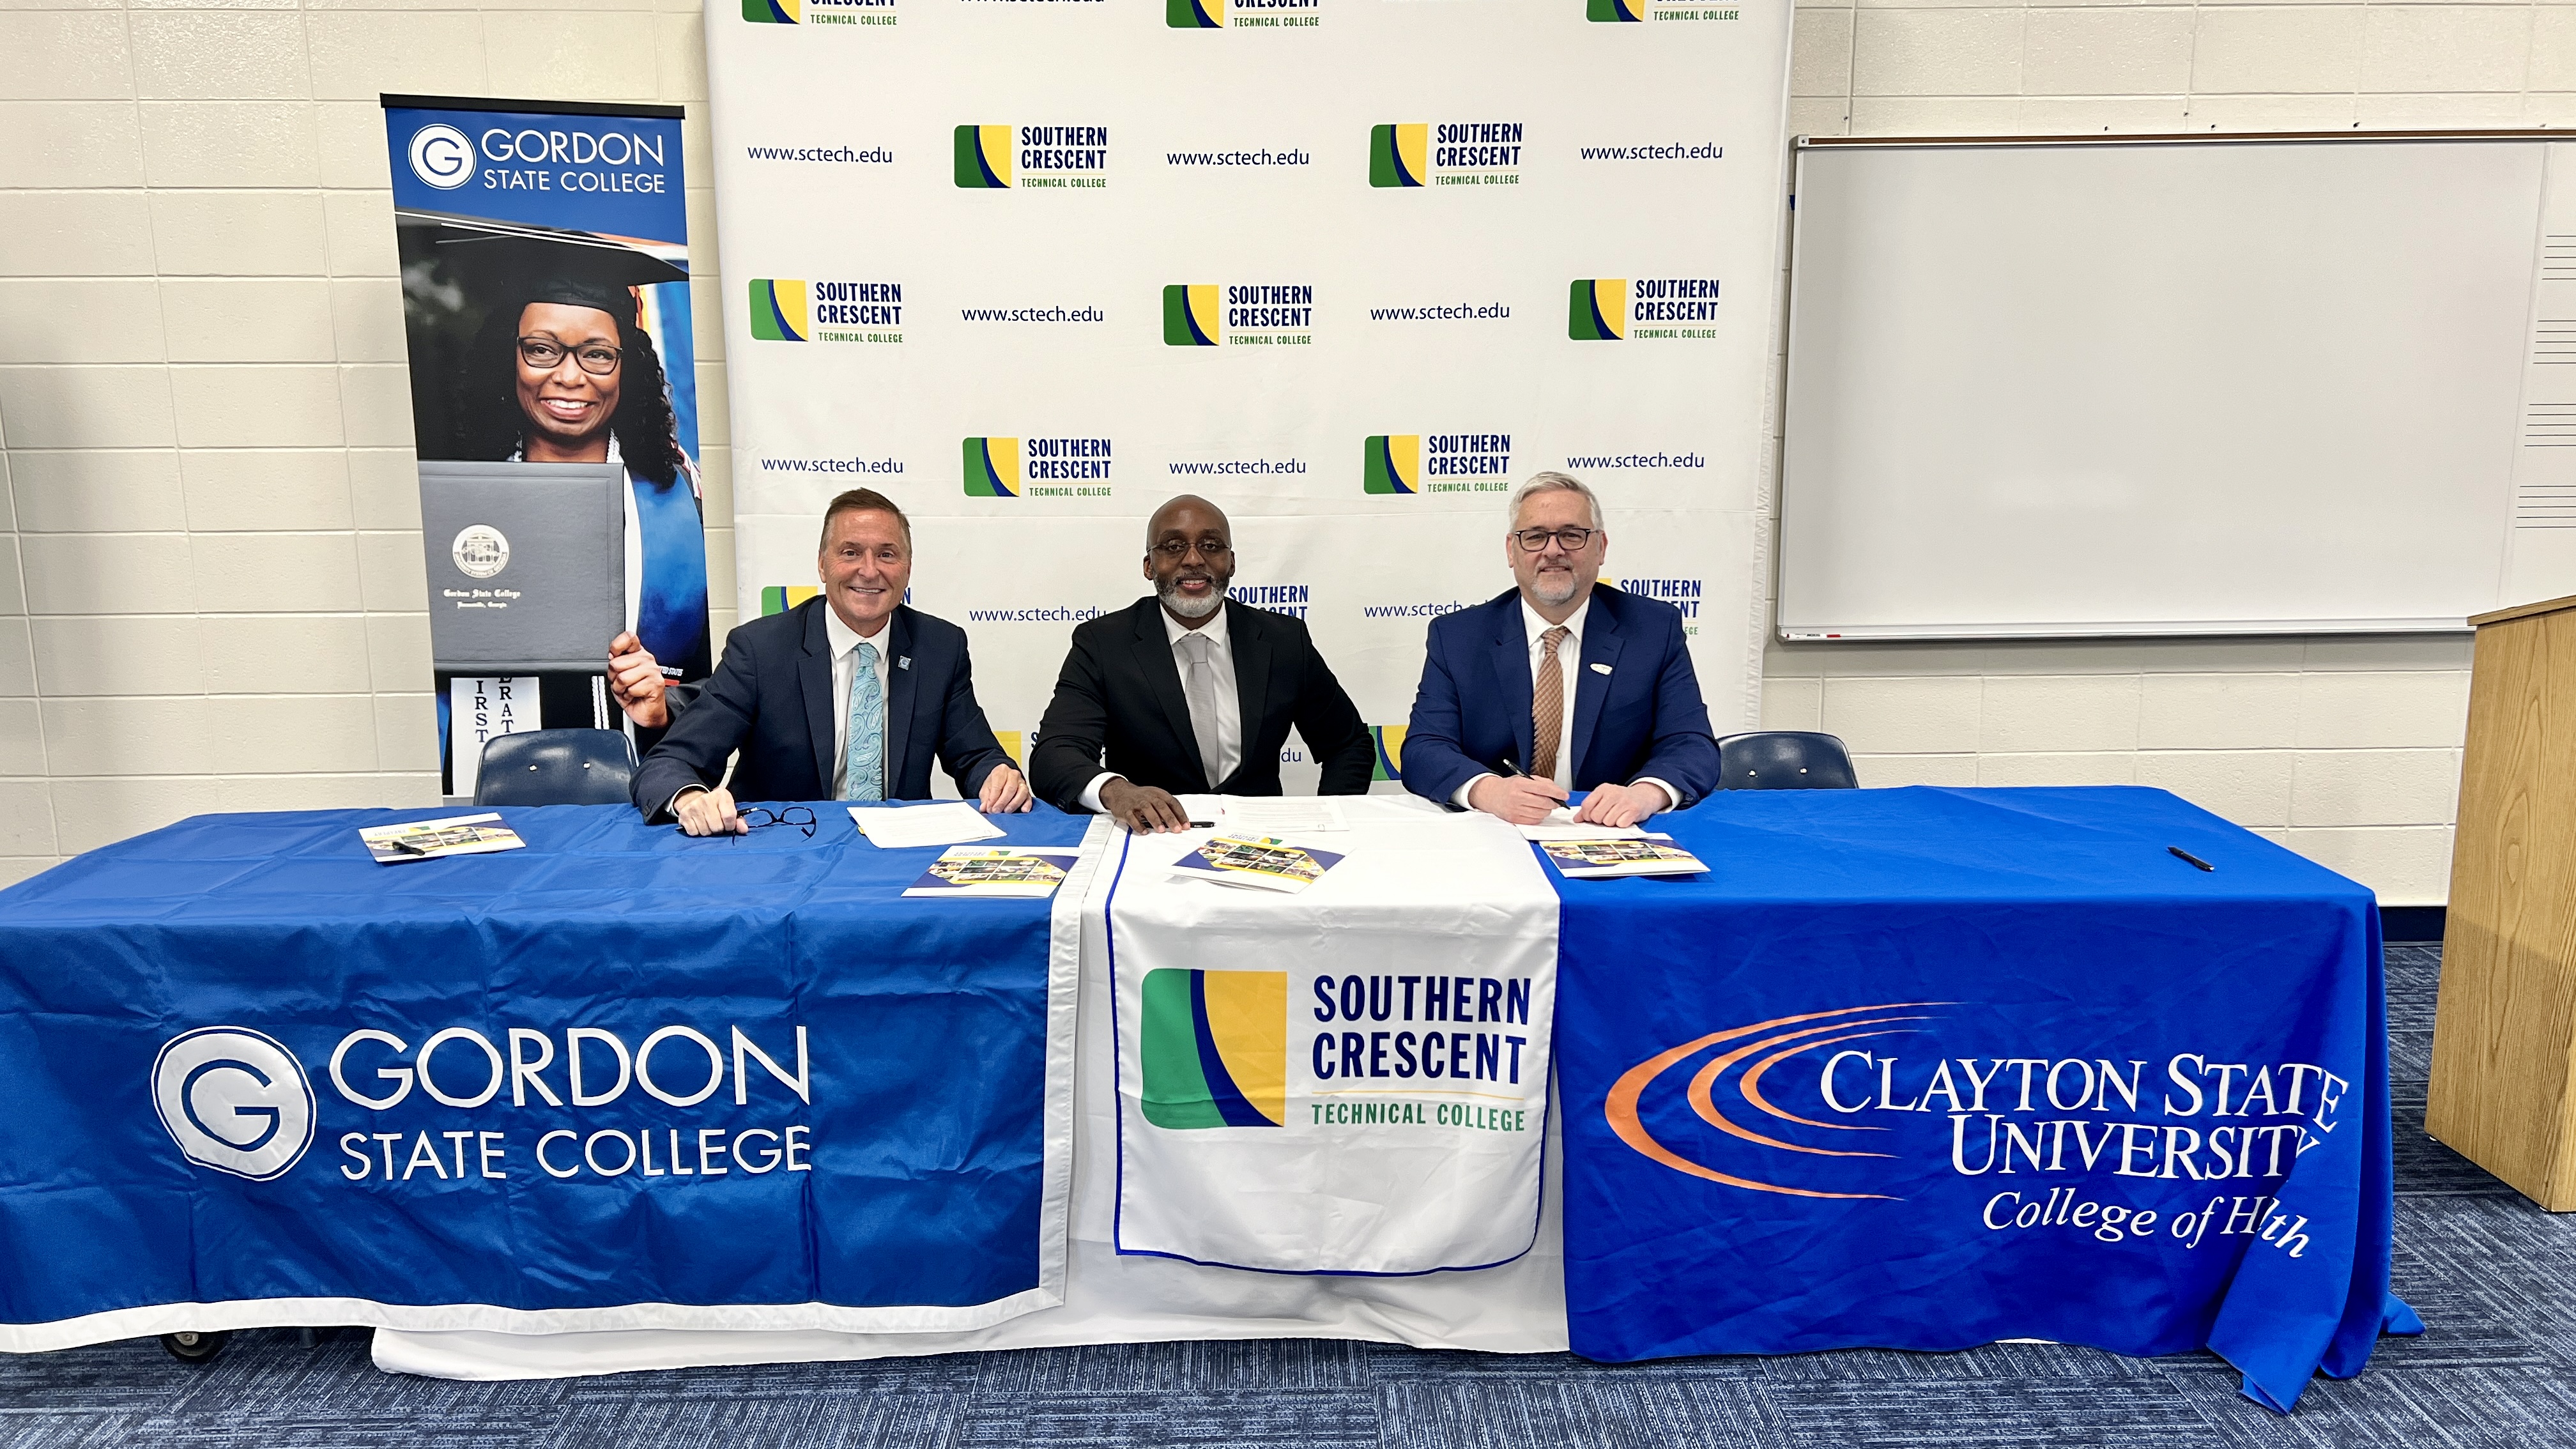 Gordon State College President Dr. Donald Green, SCTC President Dr. Irvin Clark and Clayton State University Dean of the College of Health Dewayne Hooks, sign articulation agreements at the RN Bridge Launch Program